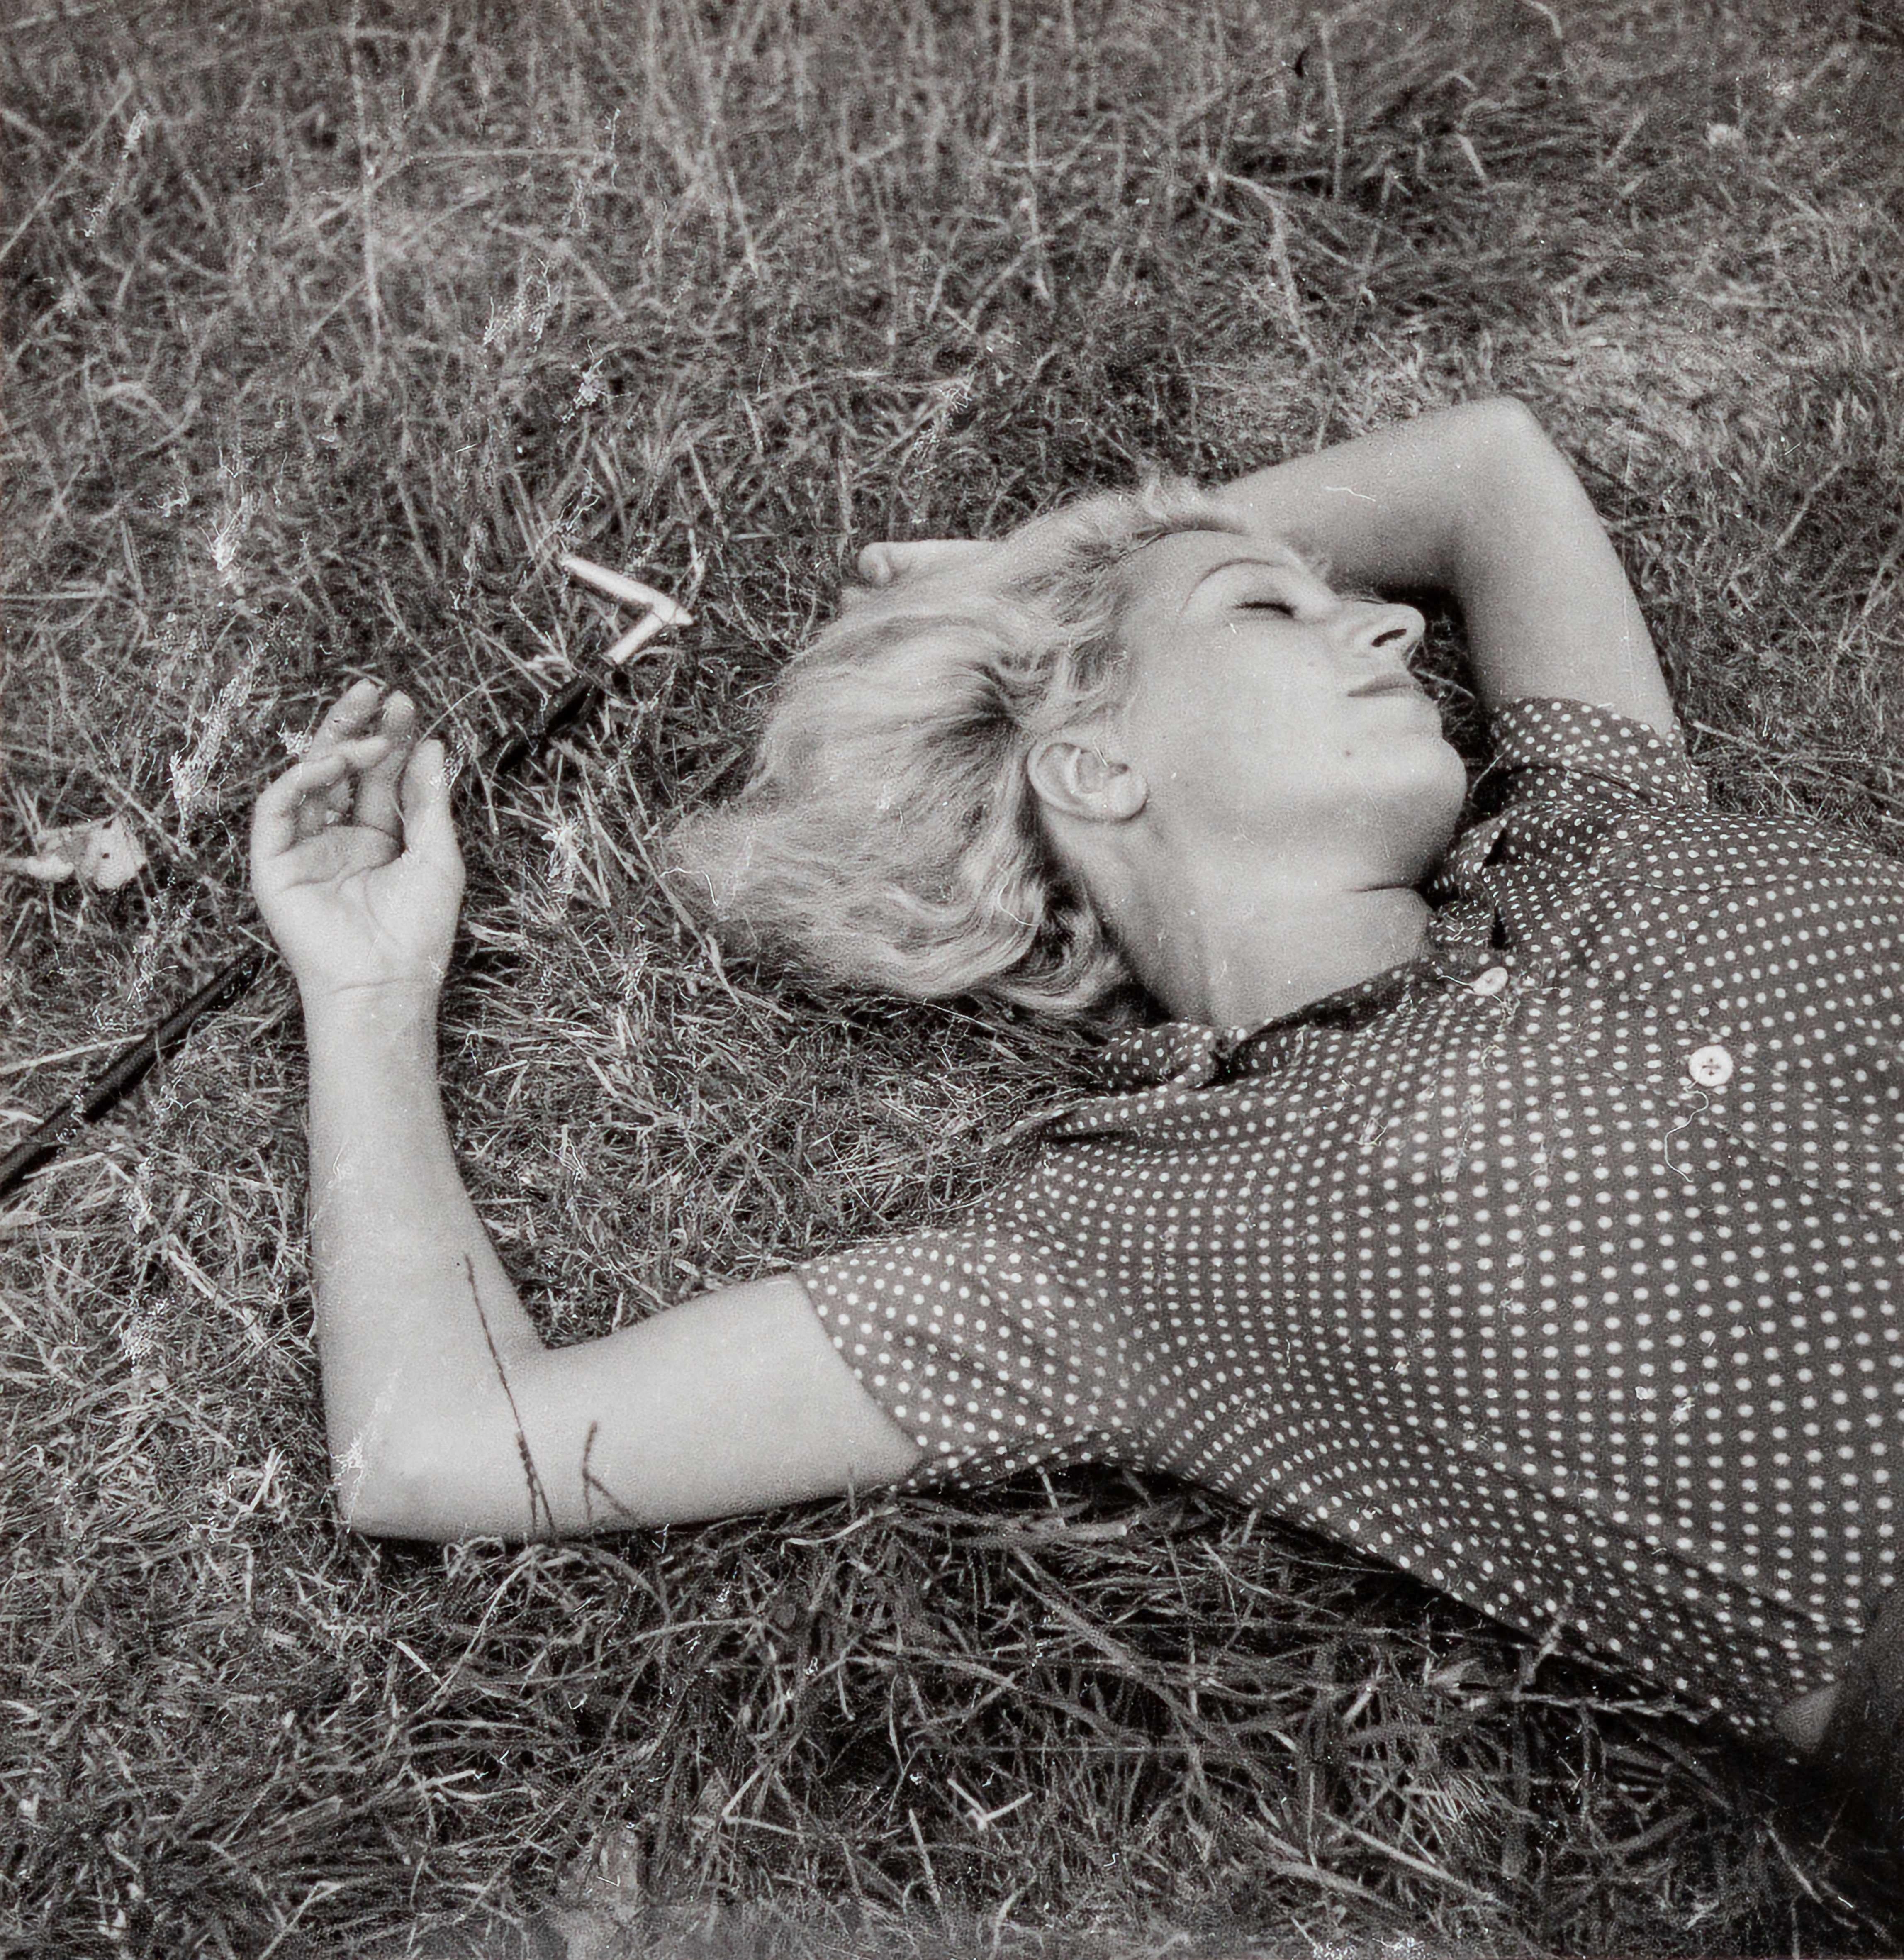 Jacqueline Lamba Stretched Out on the Grass